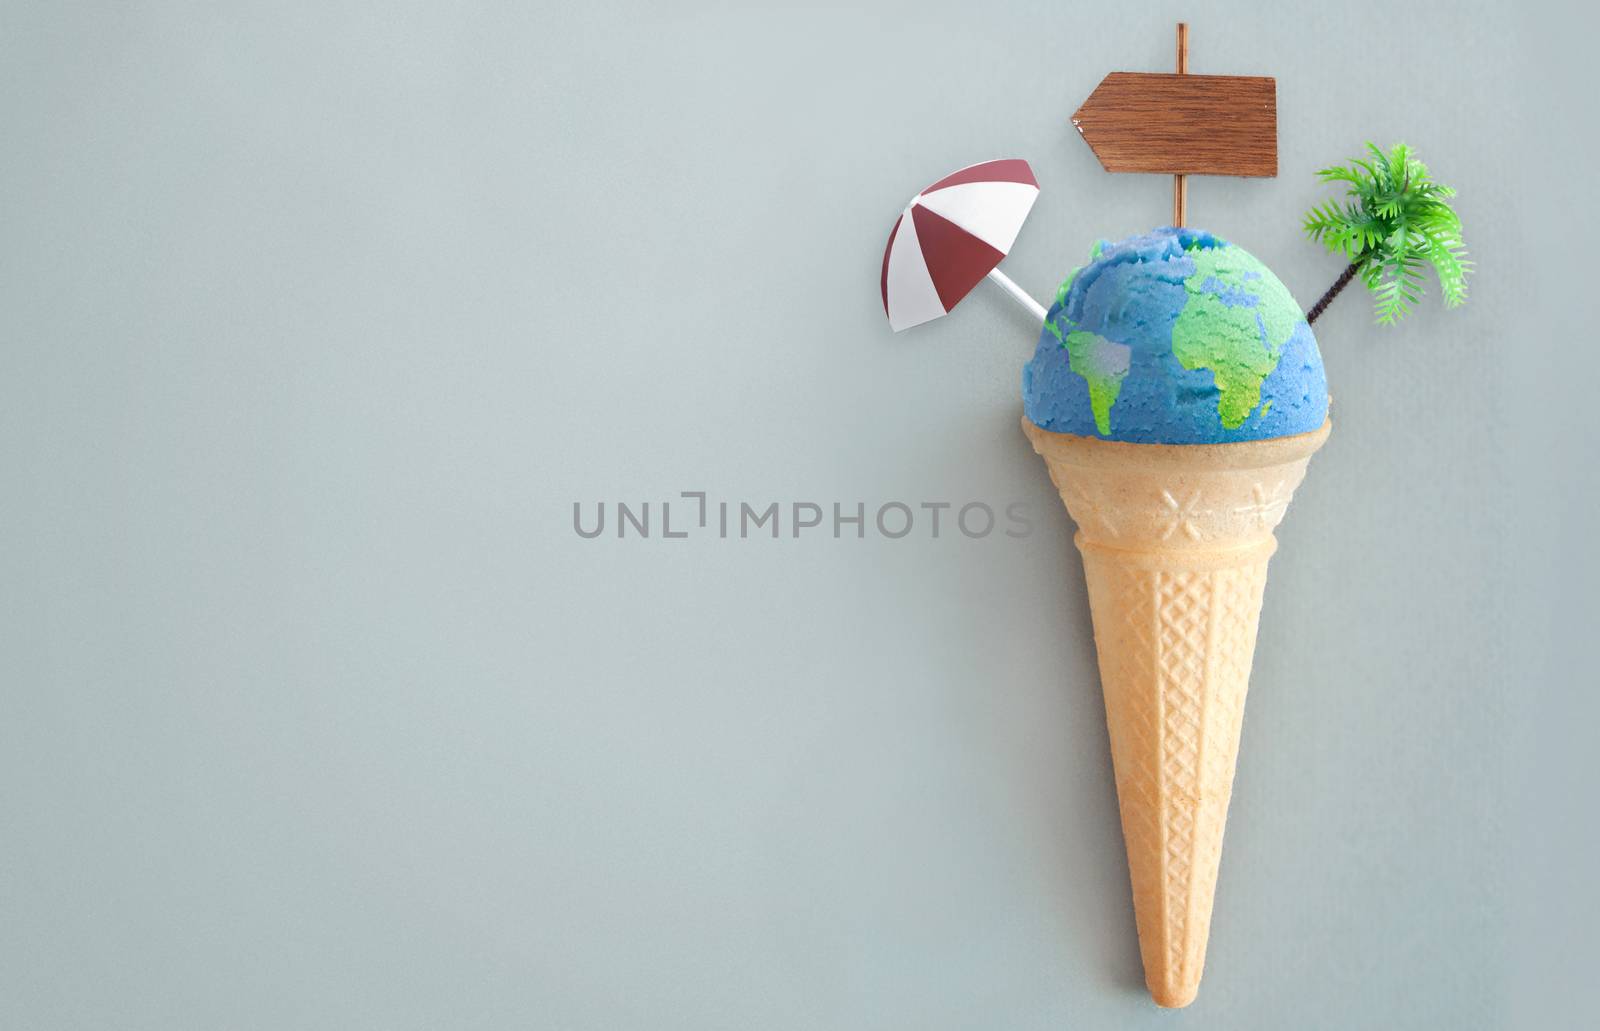 Ice cream scoop with world map and vacation items including beach post, parasol and palm tree